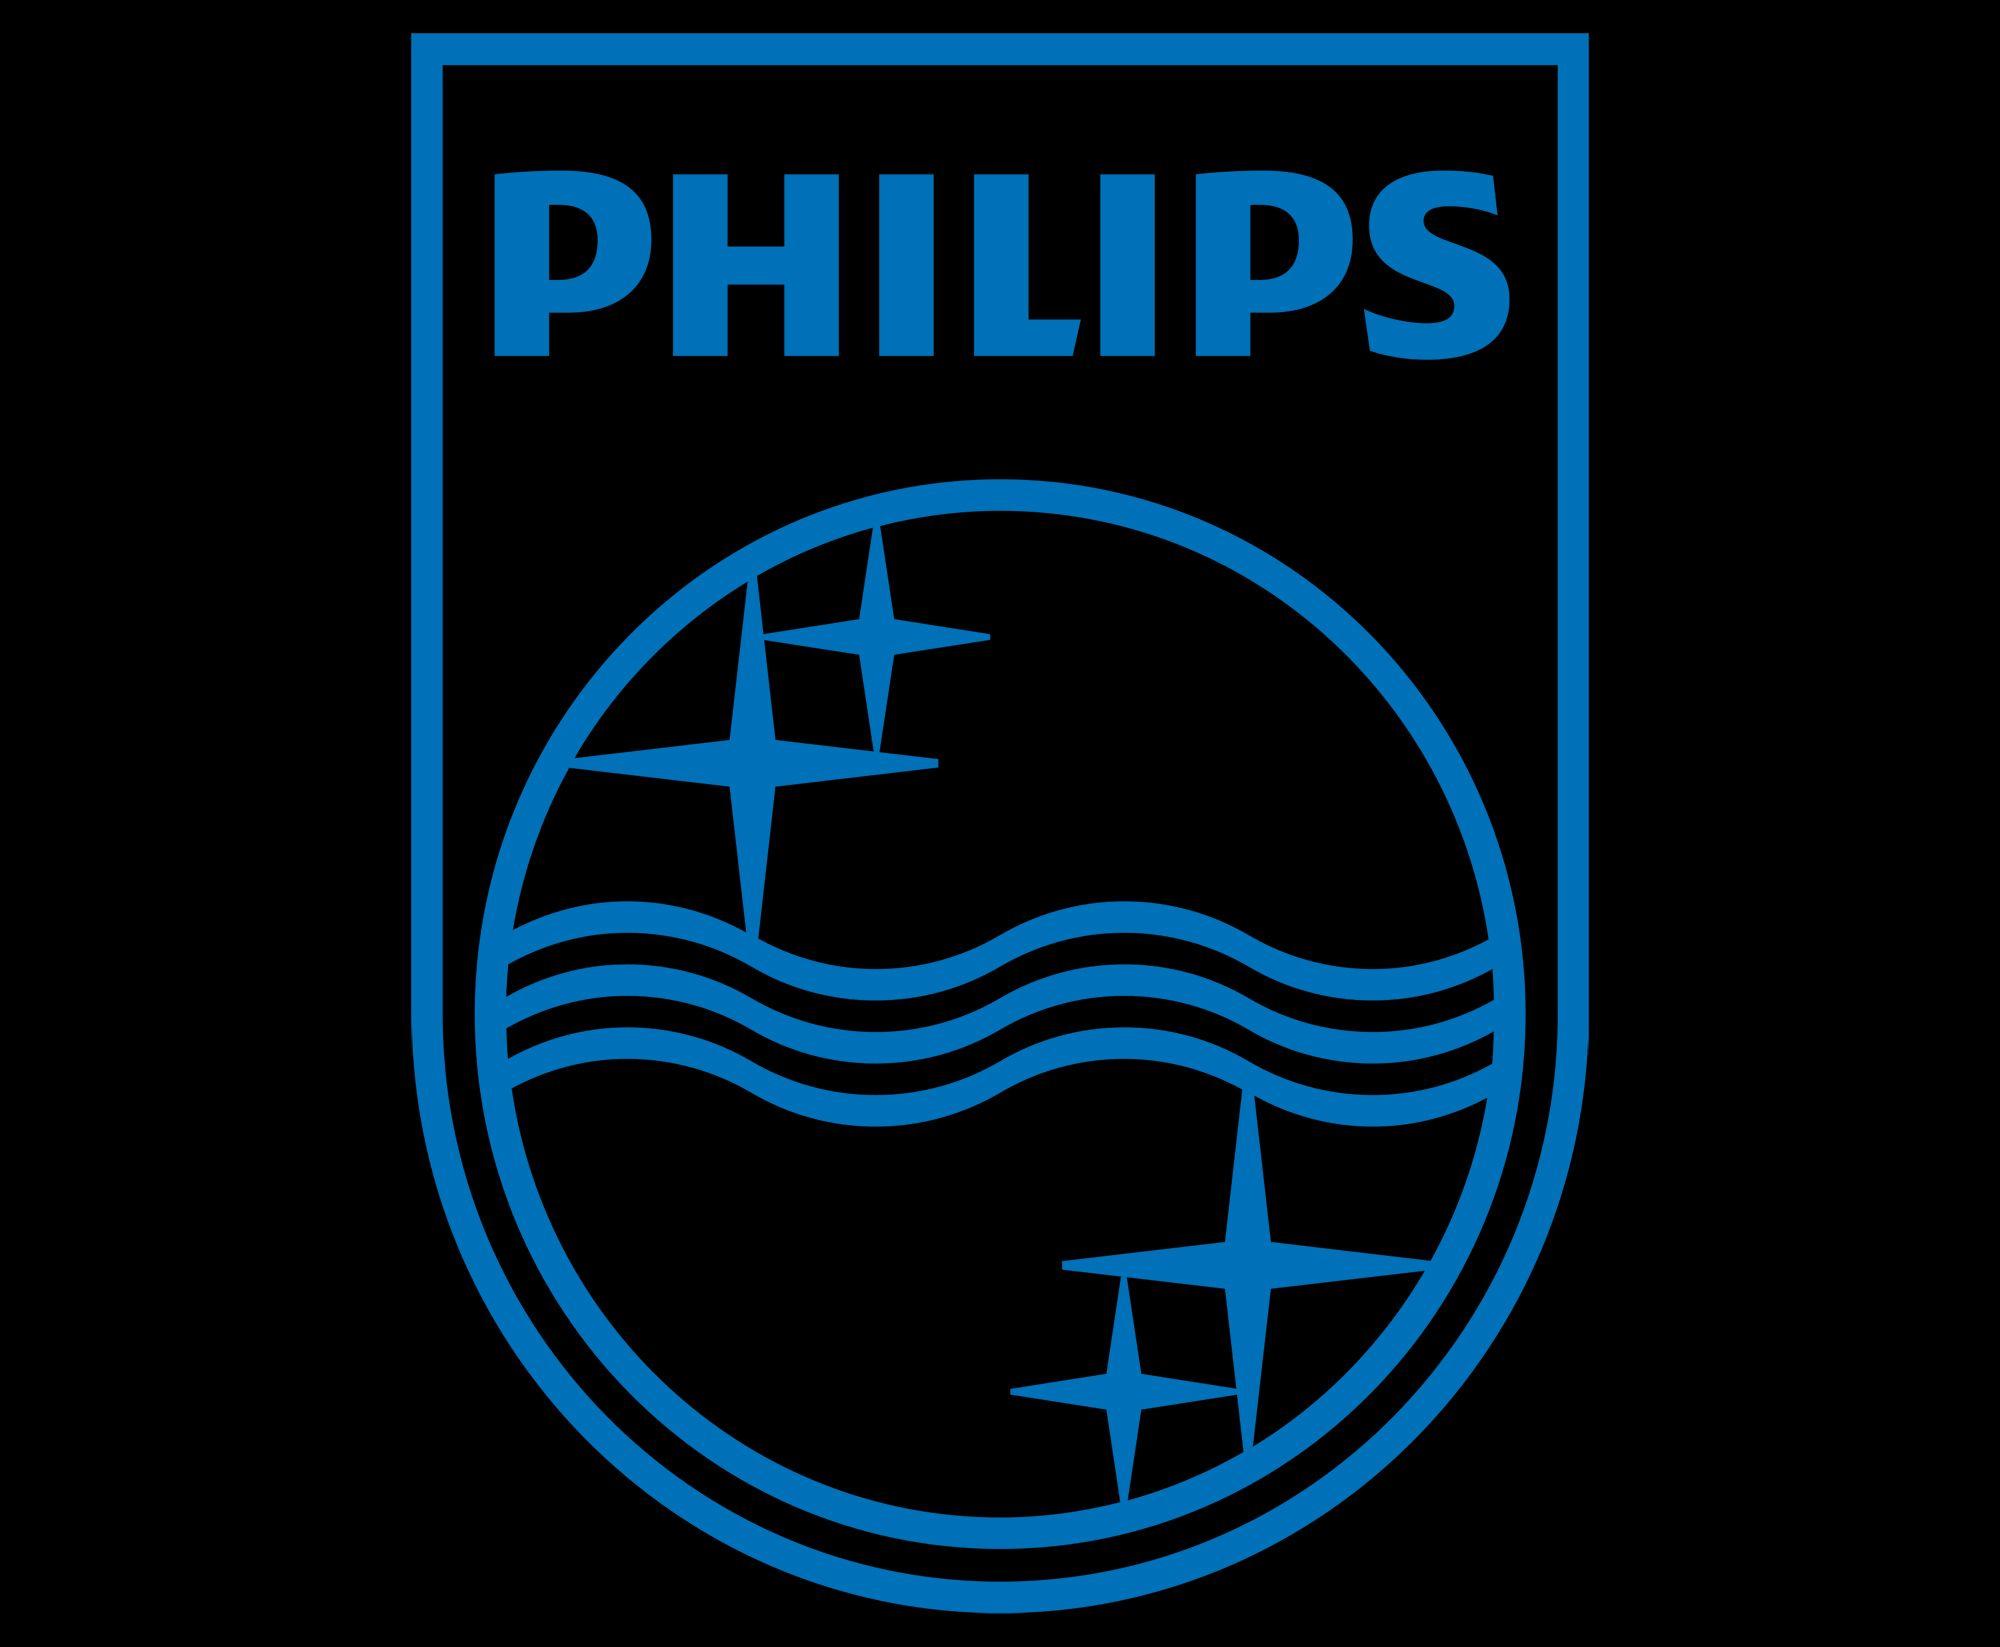 New Philips Shield Logo - Philips Logo, Philips Symbol, Meaning, History and Evolution